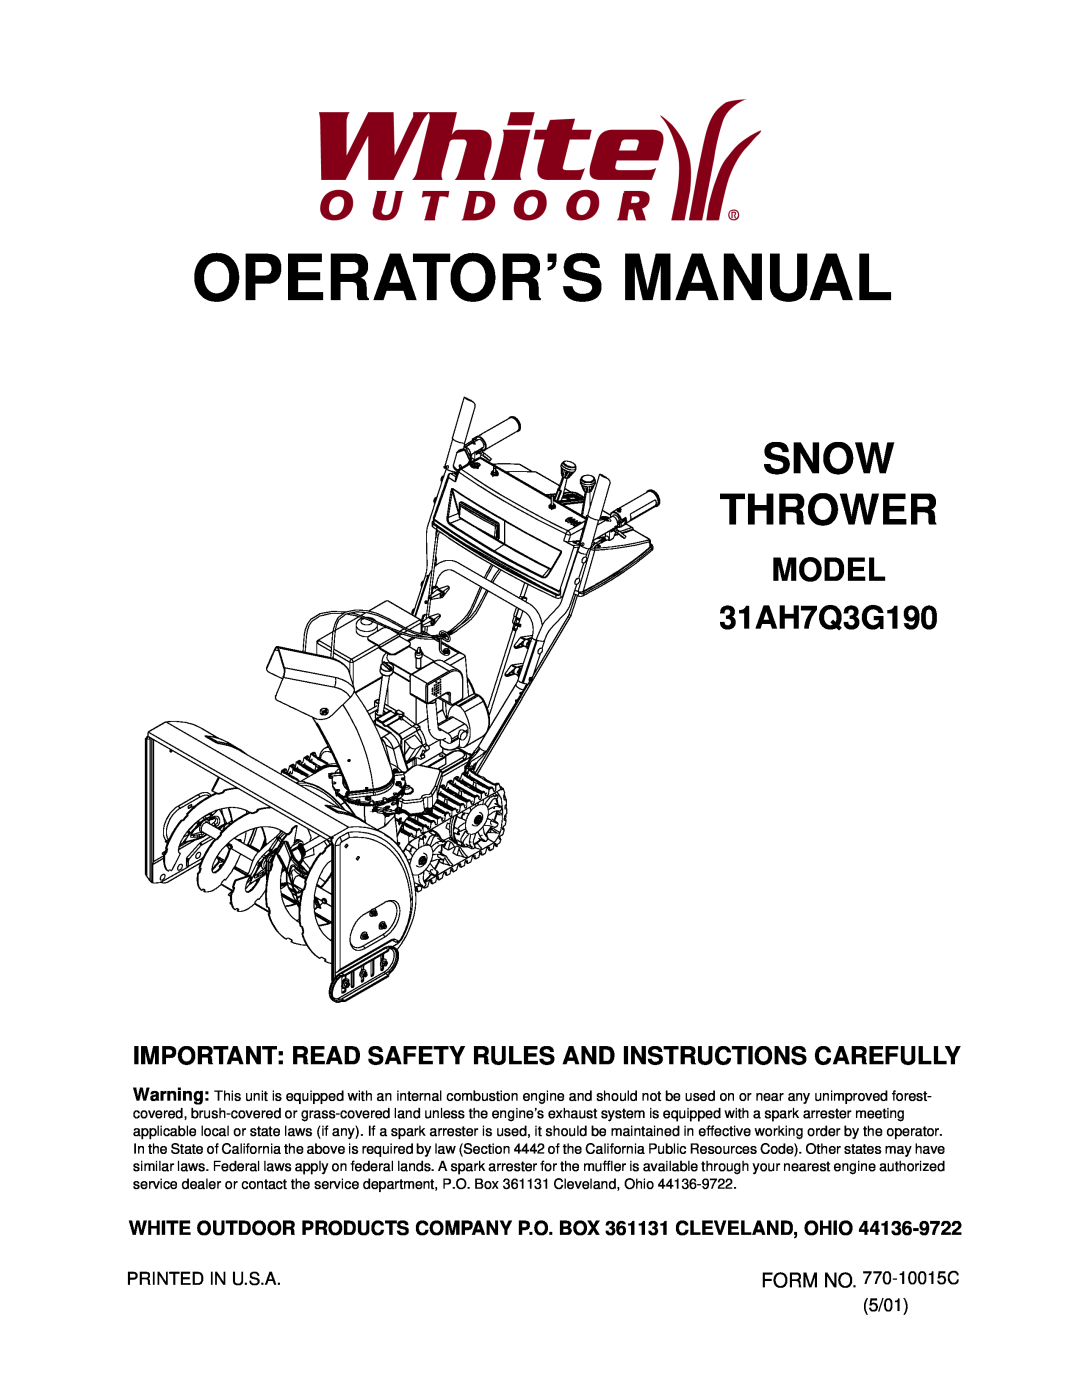 White Outdoor manual Operator’S Manual, Snow Thrower, MODEL 31AH7Q3G190 